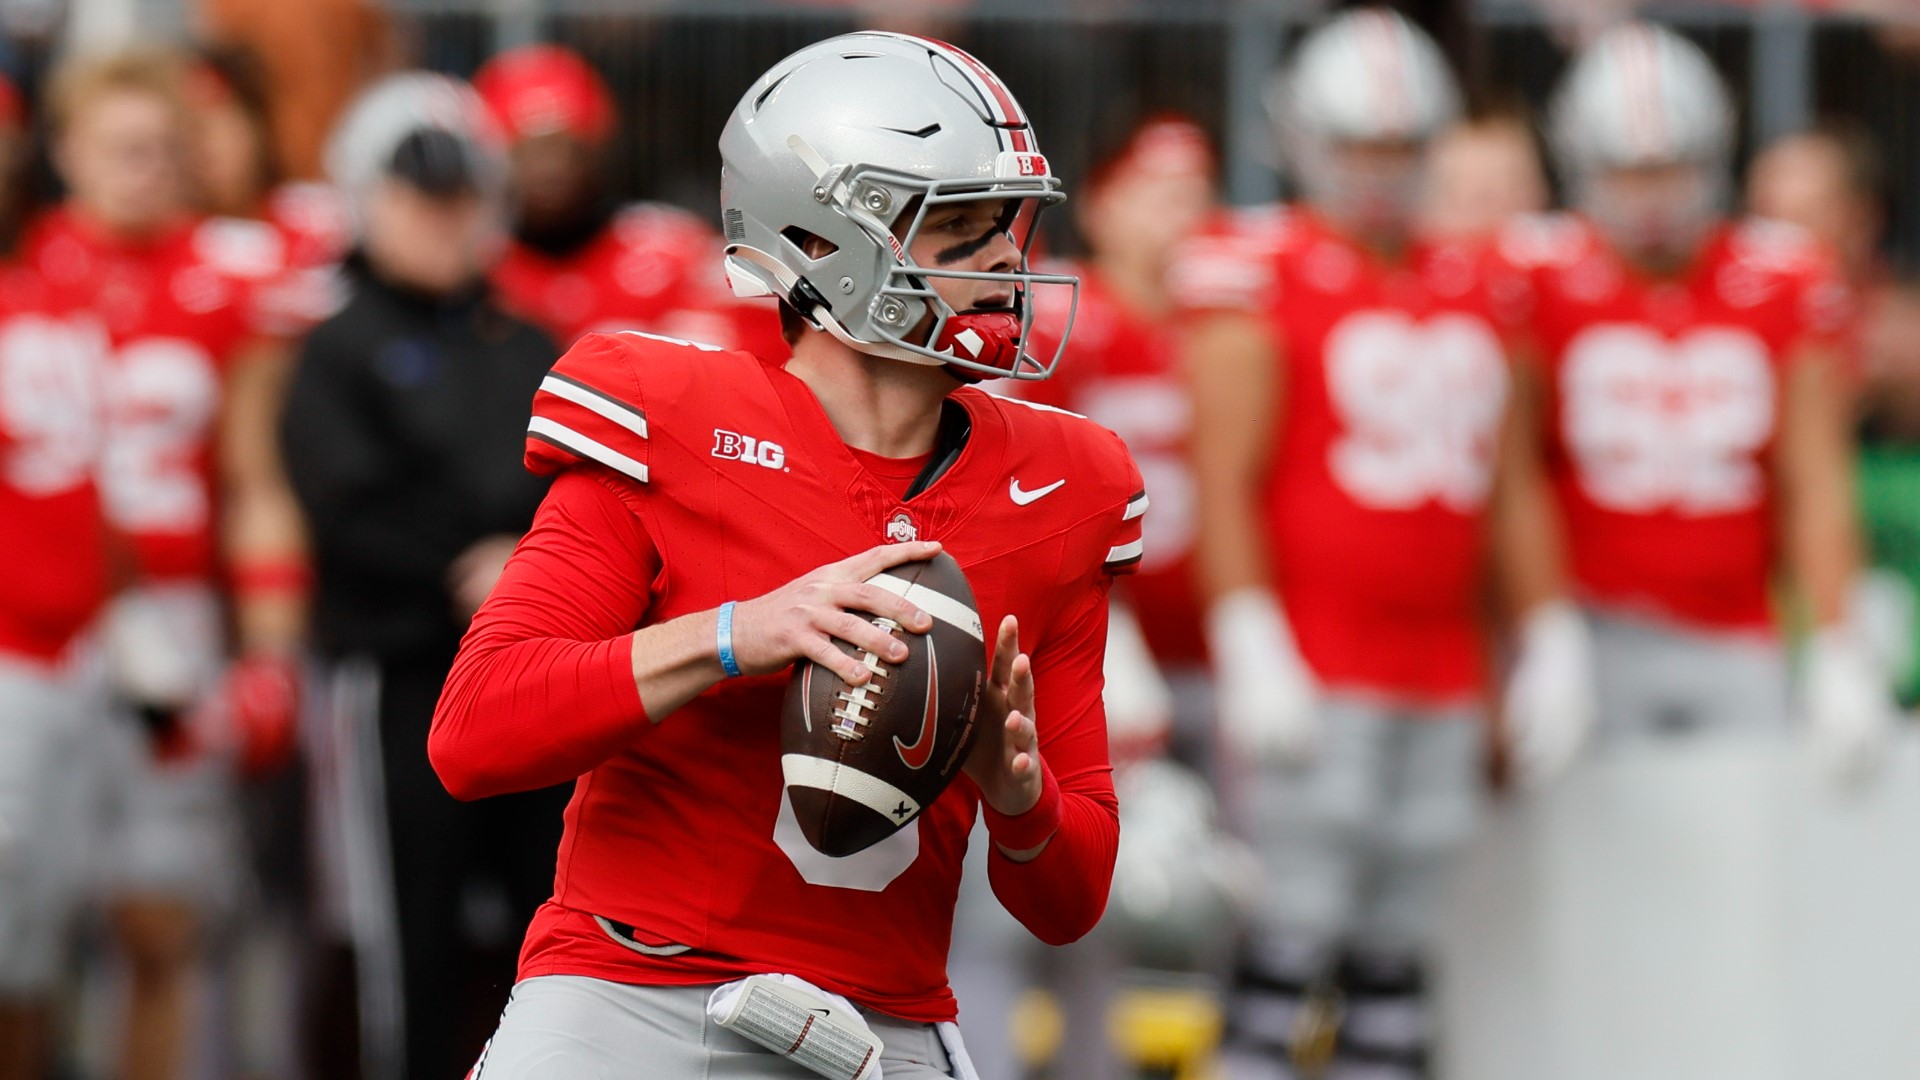 Ohio State quarterback Kyle McCord has entered his name into the NCAA transfer portal, to explore other opportunities.